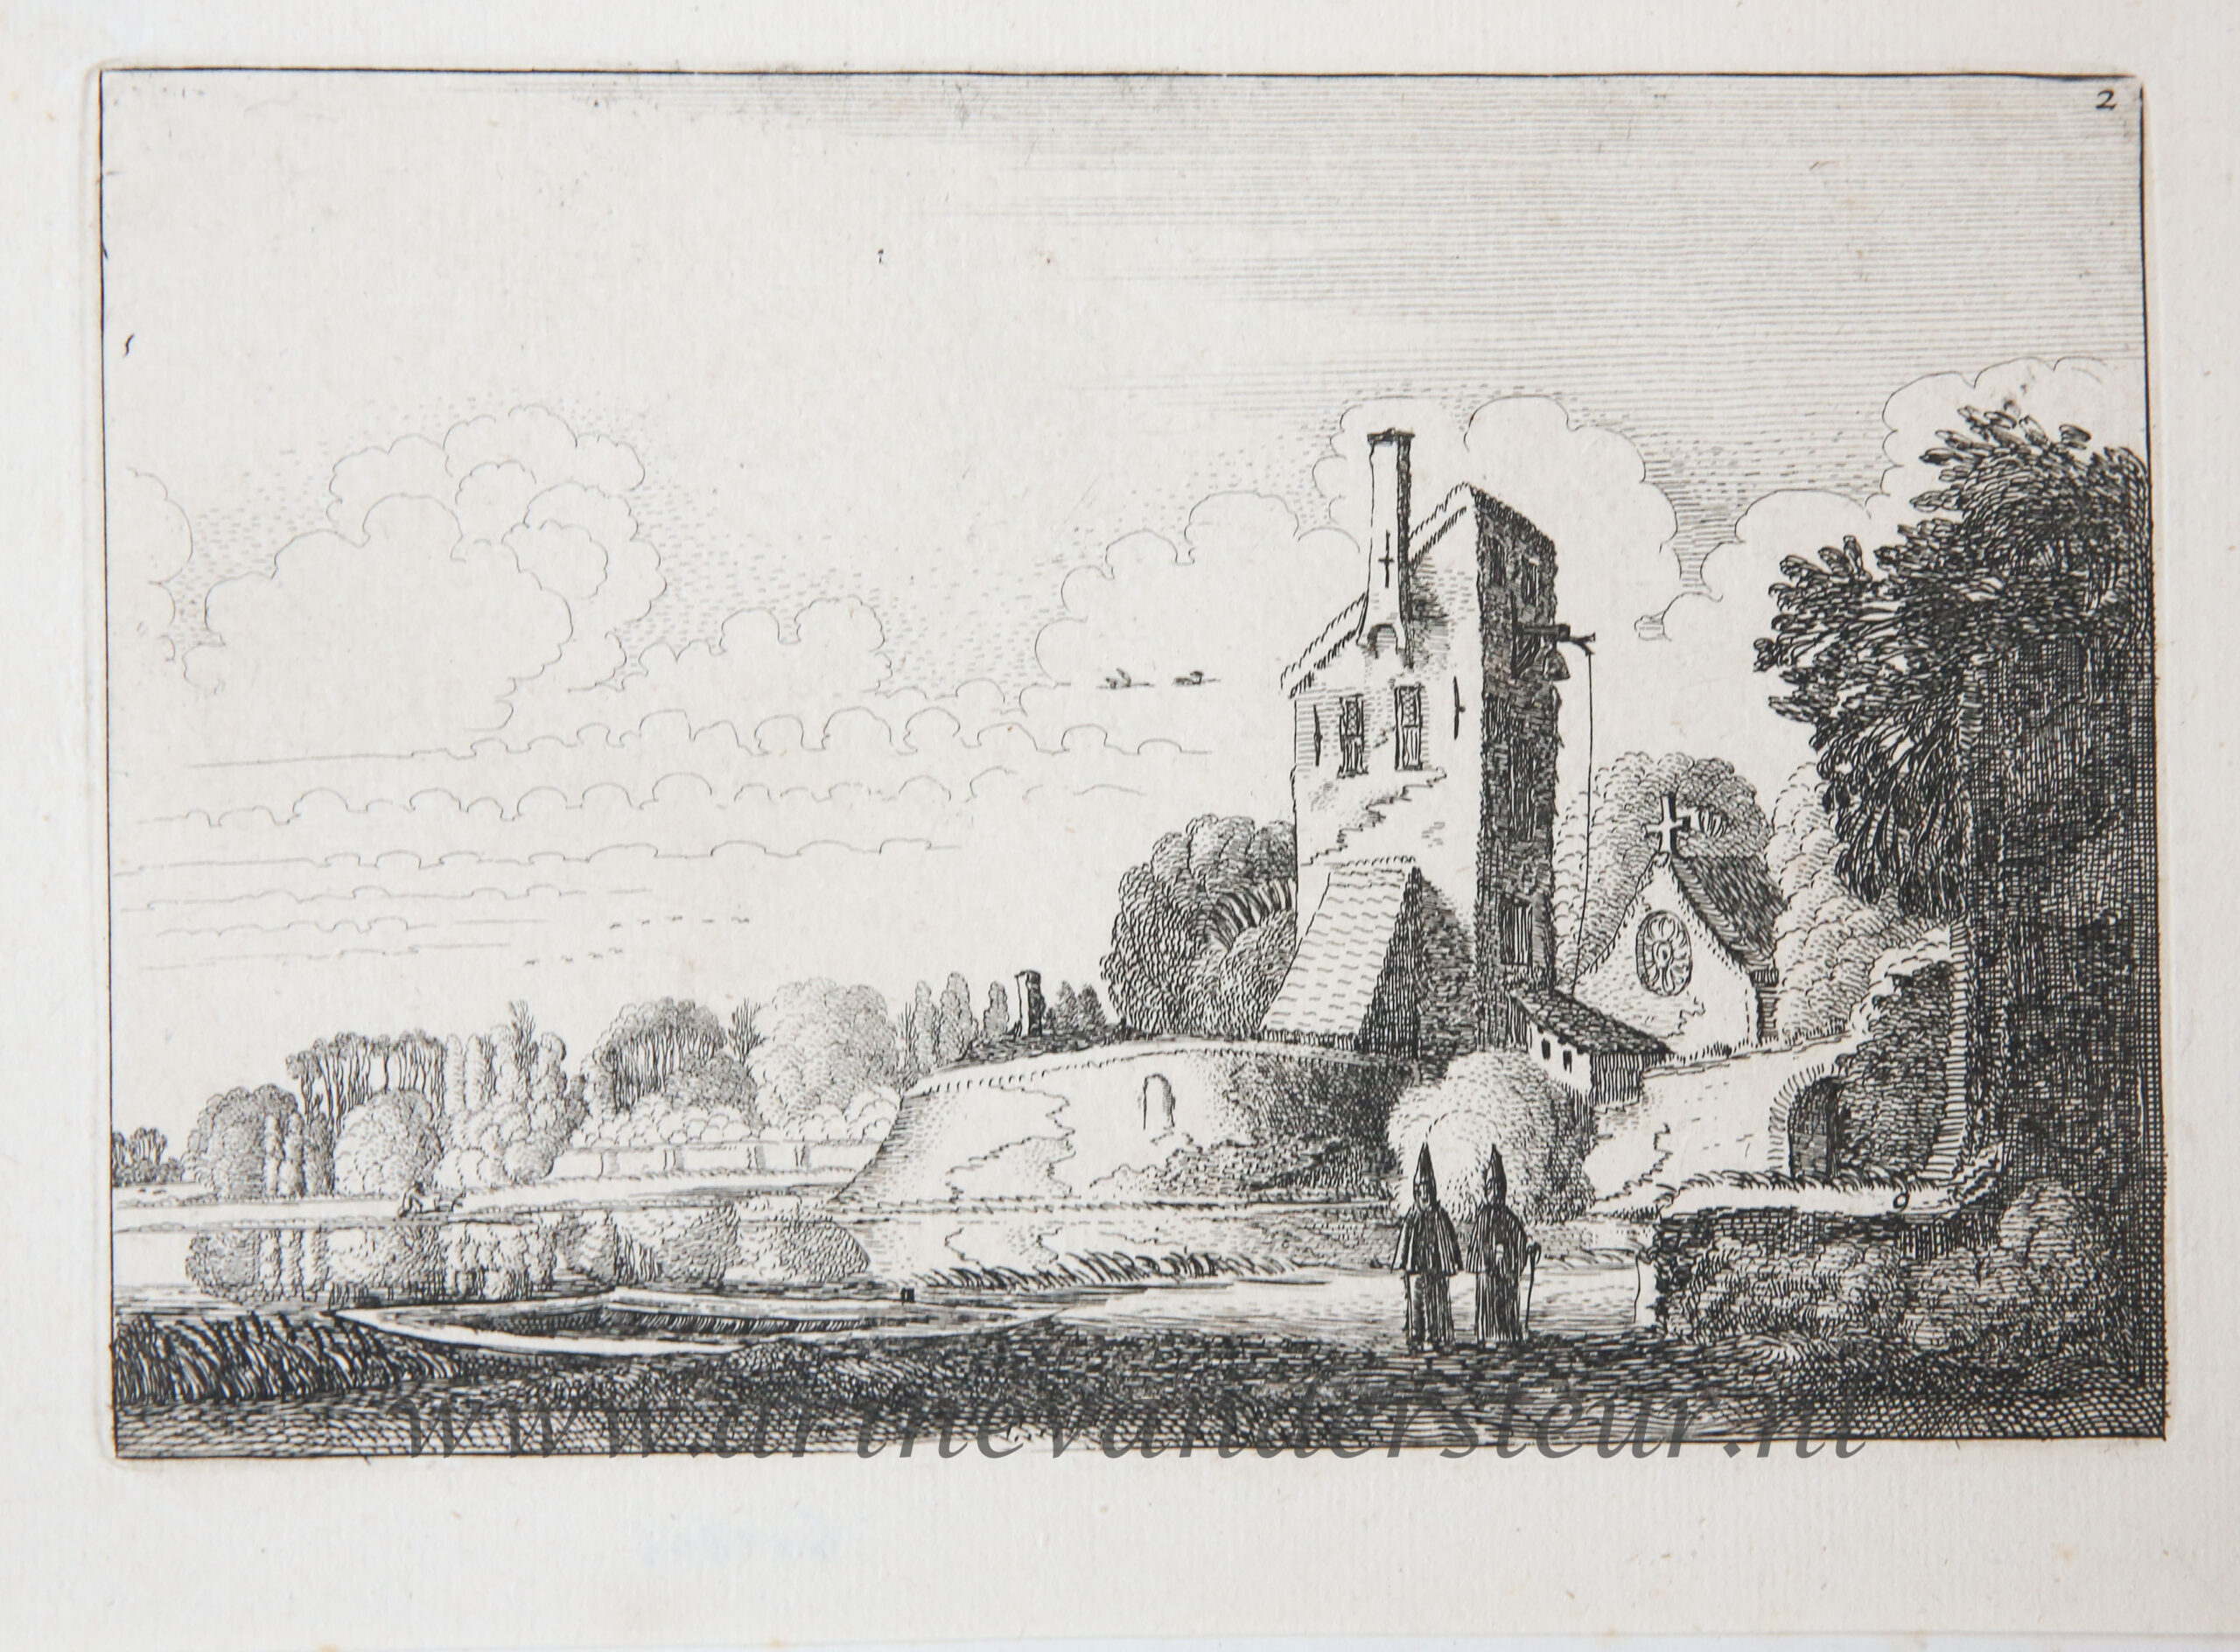 [Antique etching, ets, landscape print] J. v.d. Velde II, Landscape with fortress, a tower and a chapel, published before 1713.